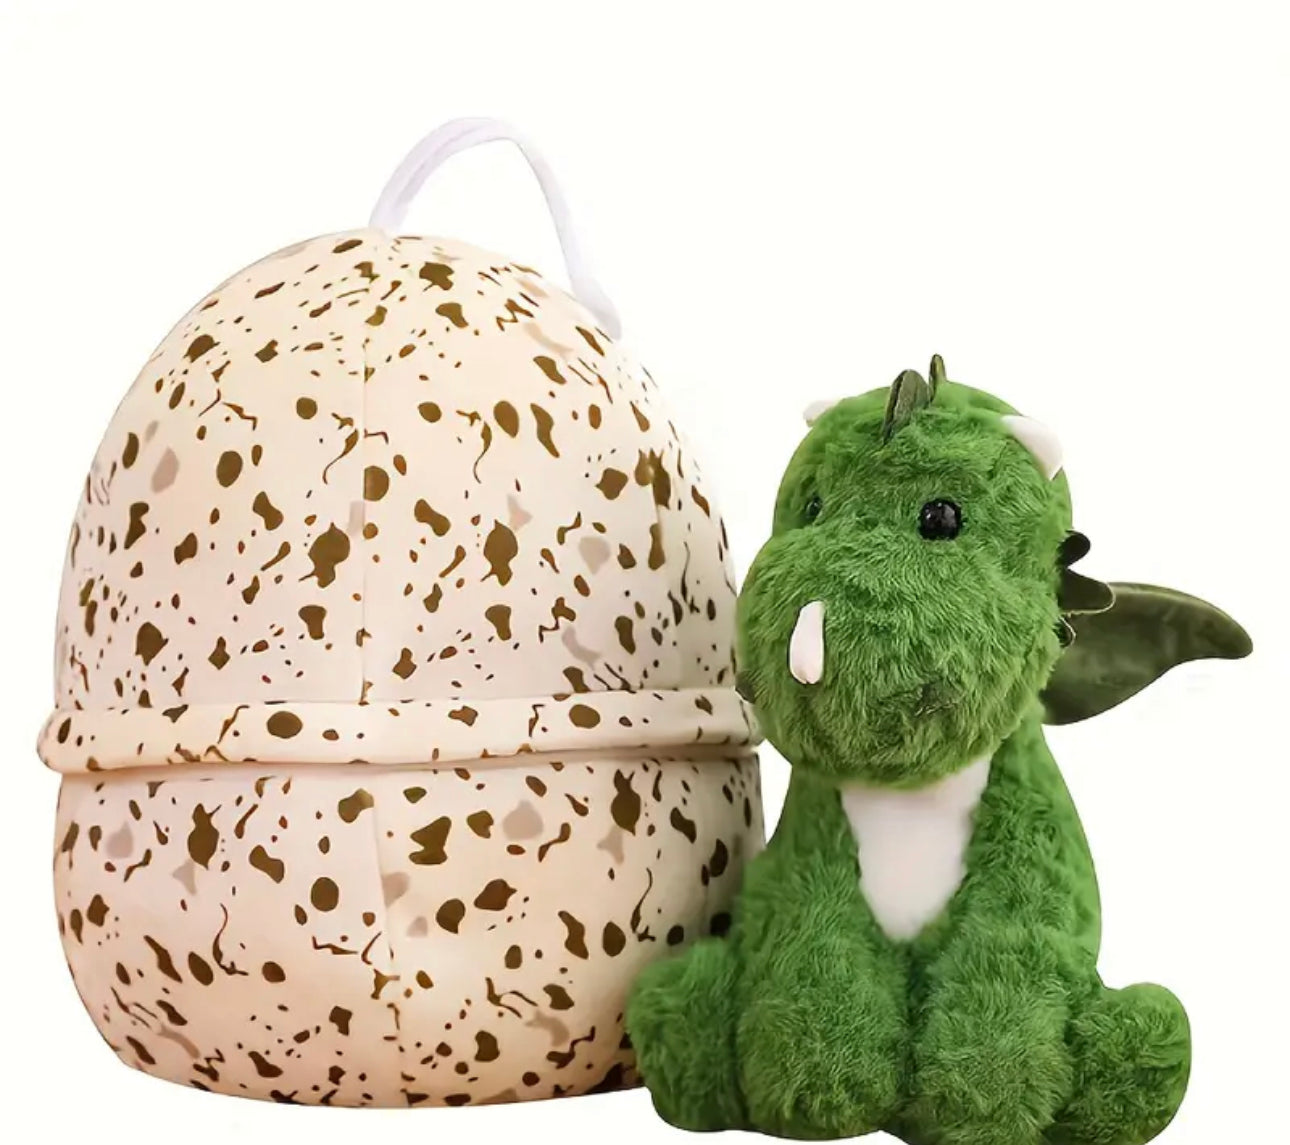 Triceratops Baby In An Egg Stuffed Animal - Dinosaur Plush Toy - Green Triceratops With An Egg Dino Plush Inside